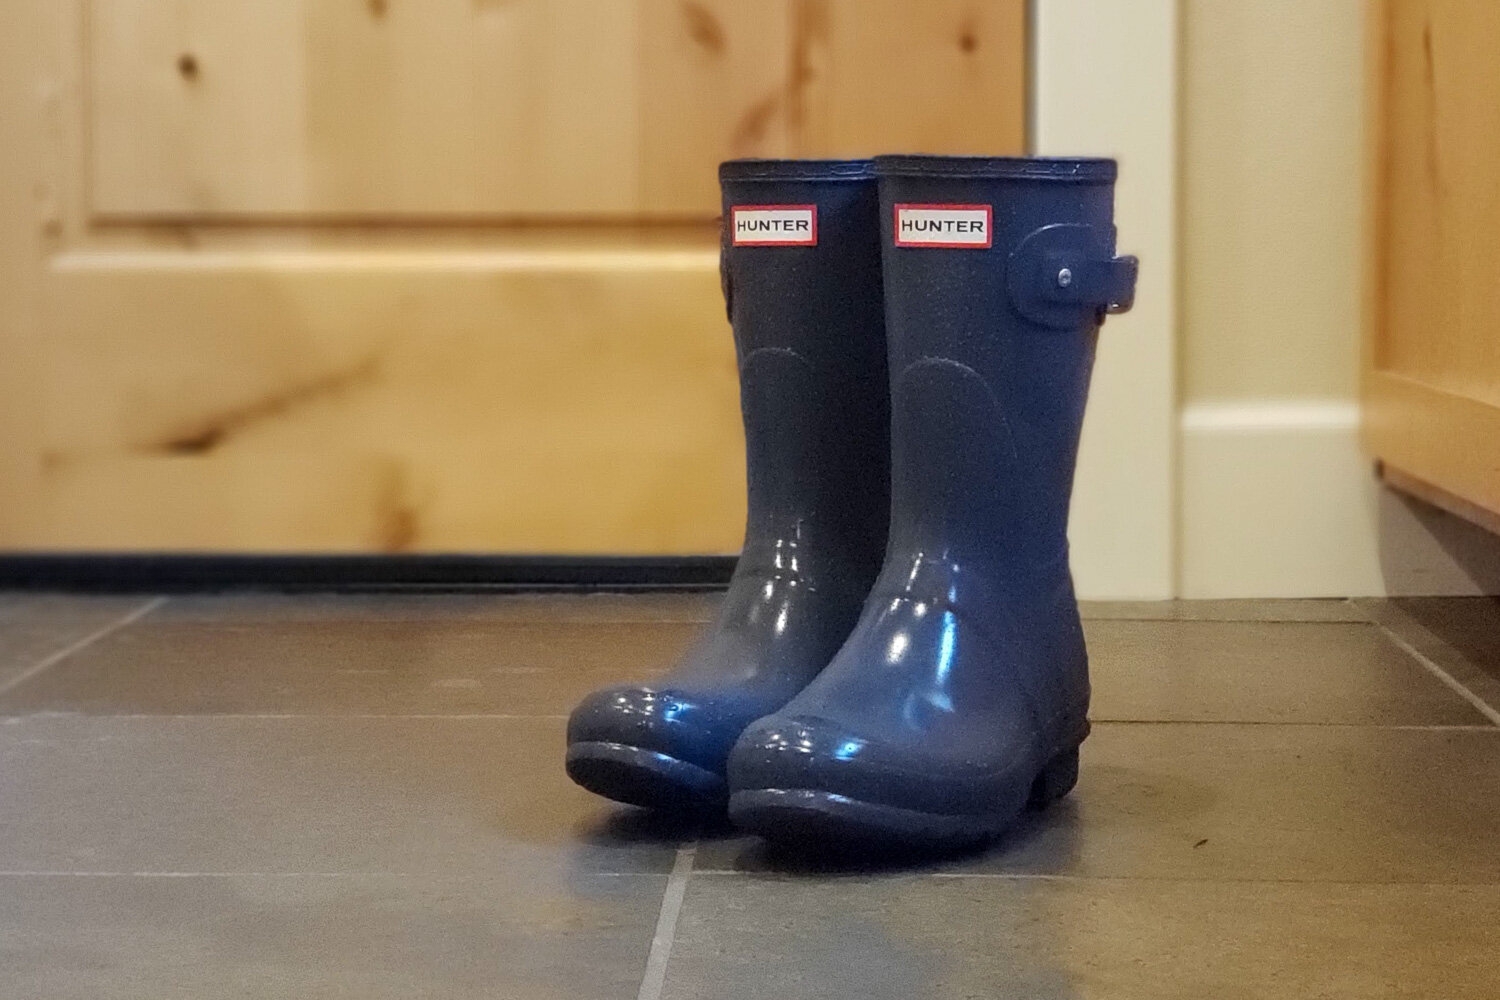 Keep rubber boots like the Hunter Original Short inDOORS to avoid cold feet.